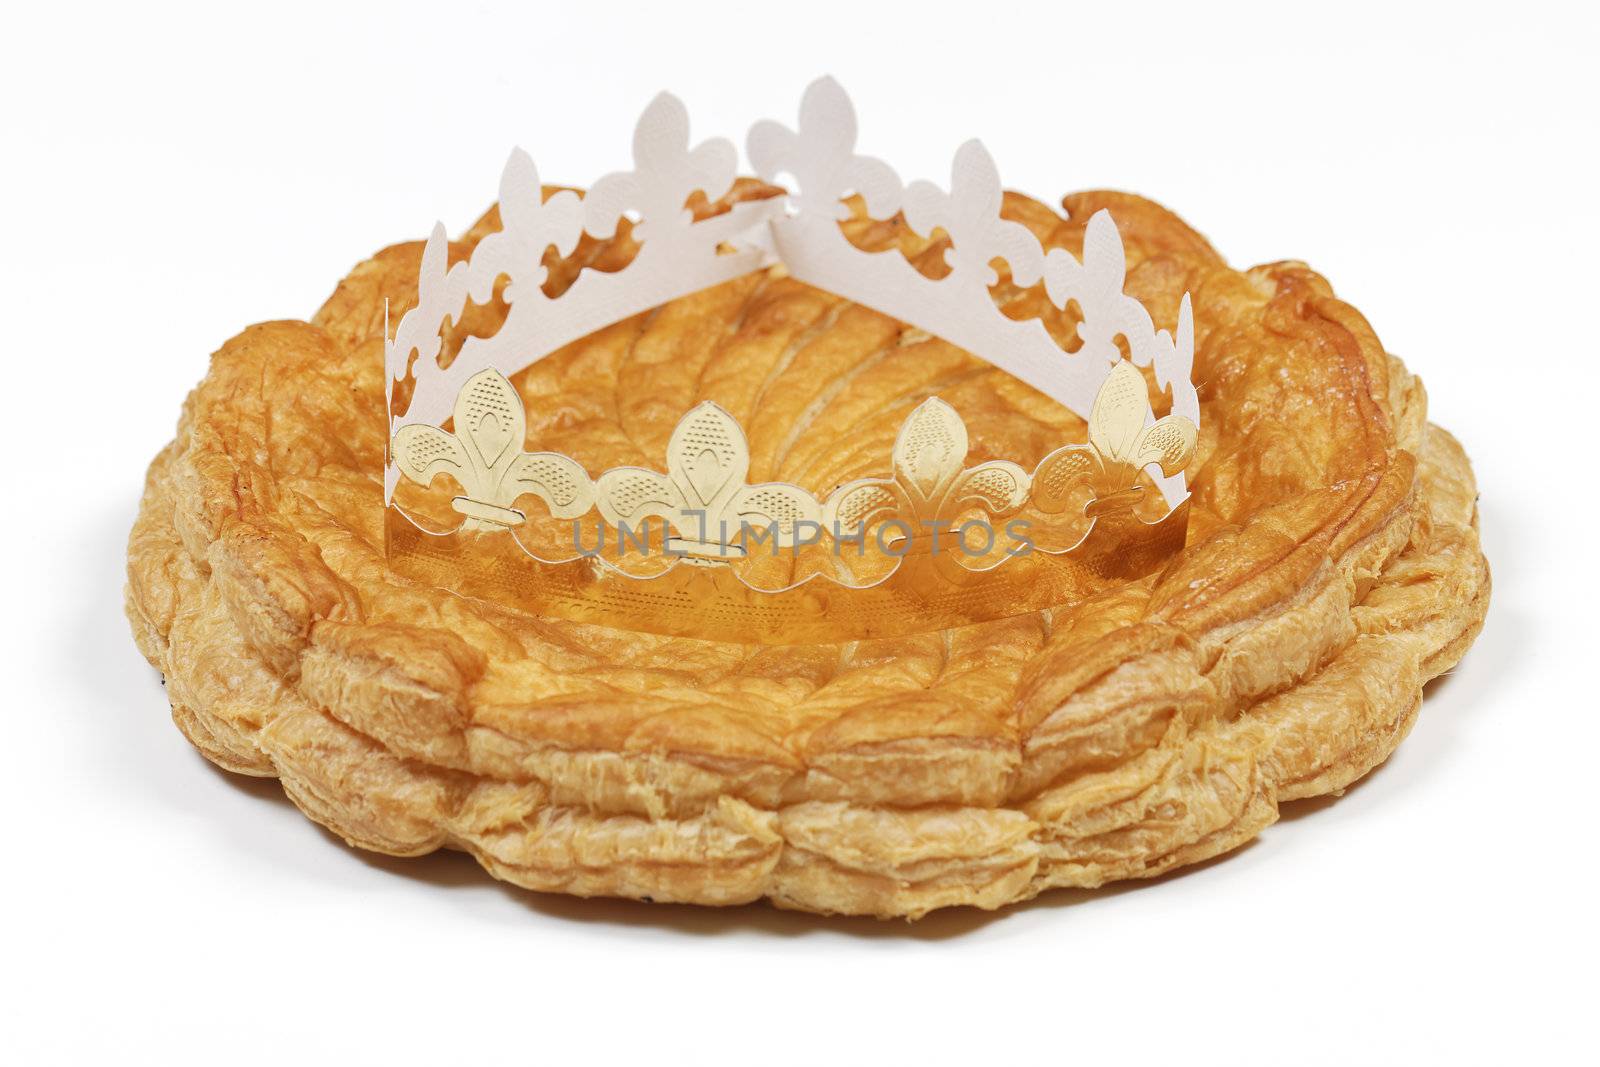 epiphany cake and crown isolated on white background